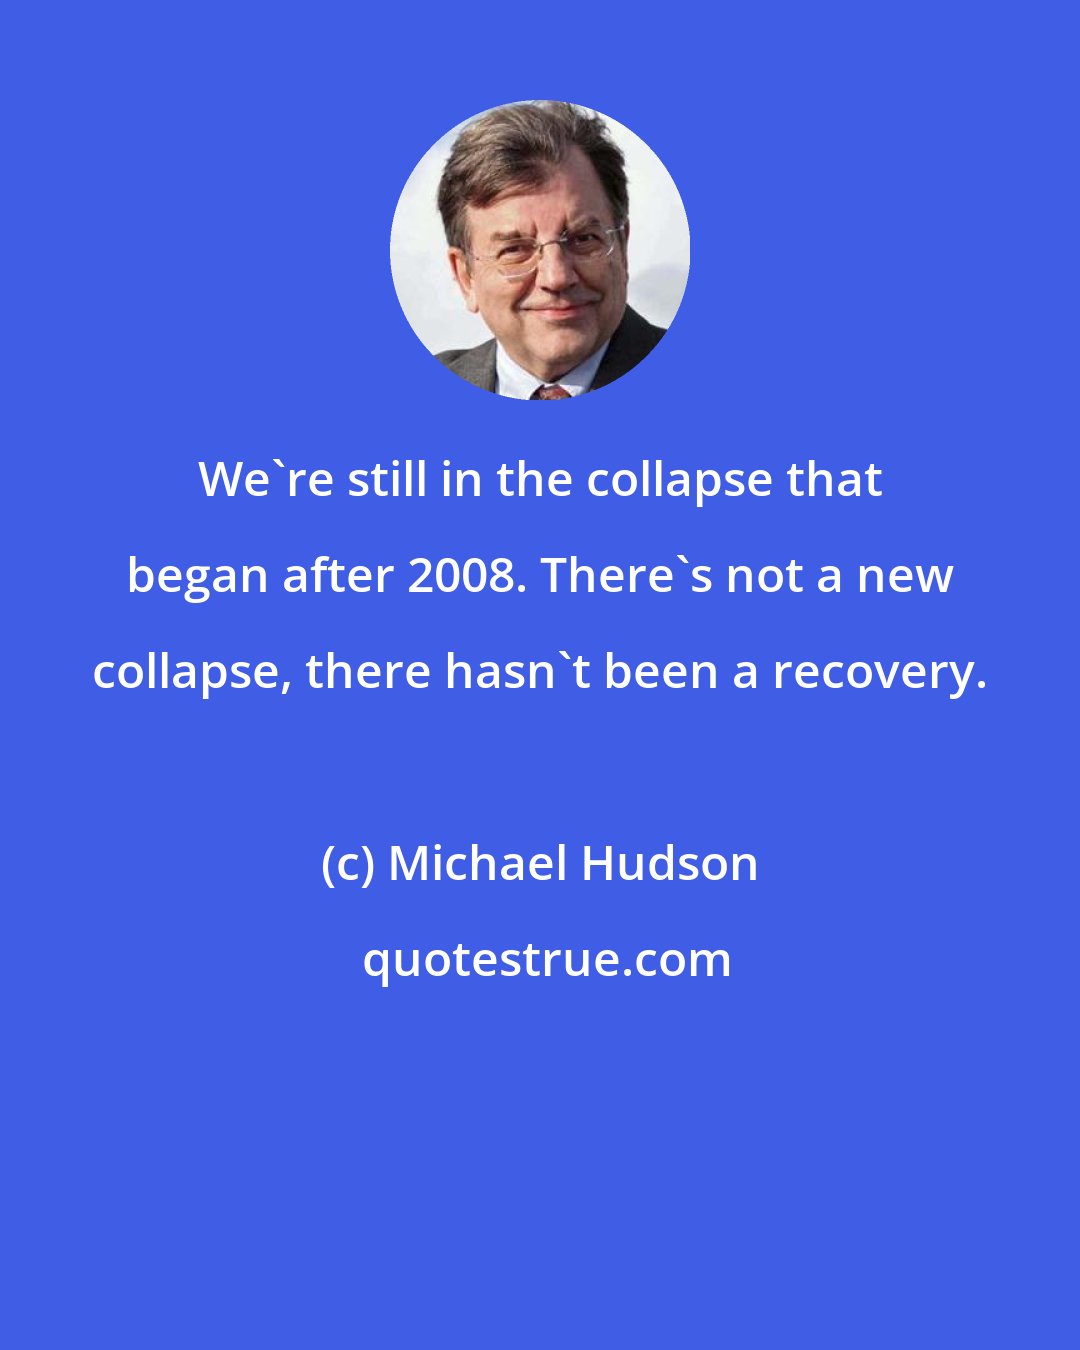 Michael Hudson: We're still in the collapse that began after 2008. There's not a new collapse, there hasn't been a recovery.